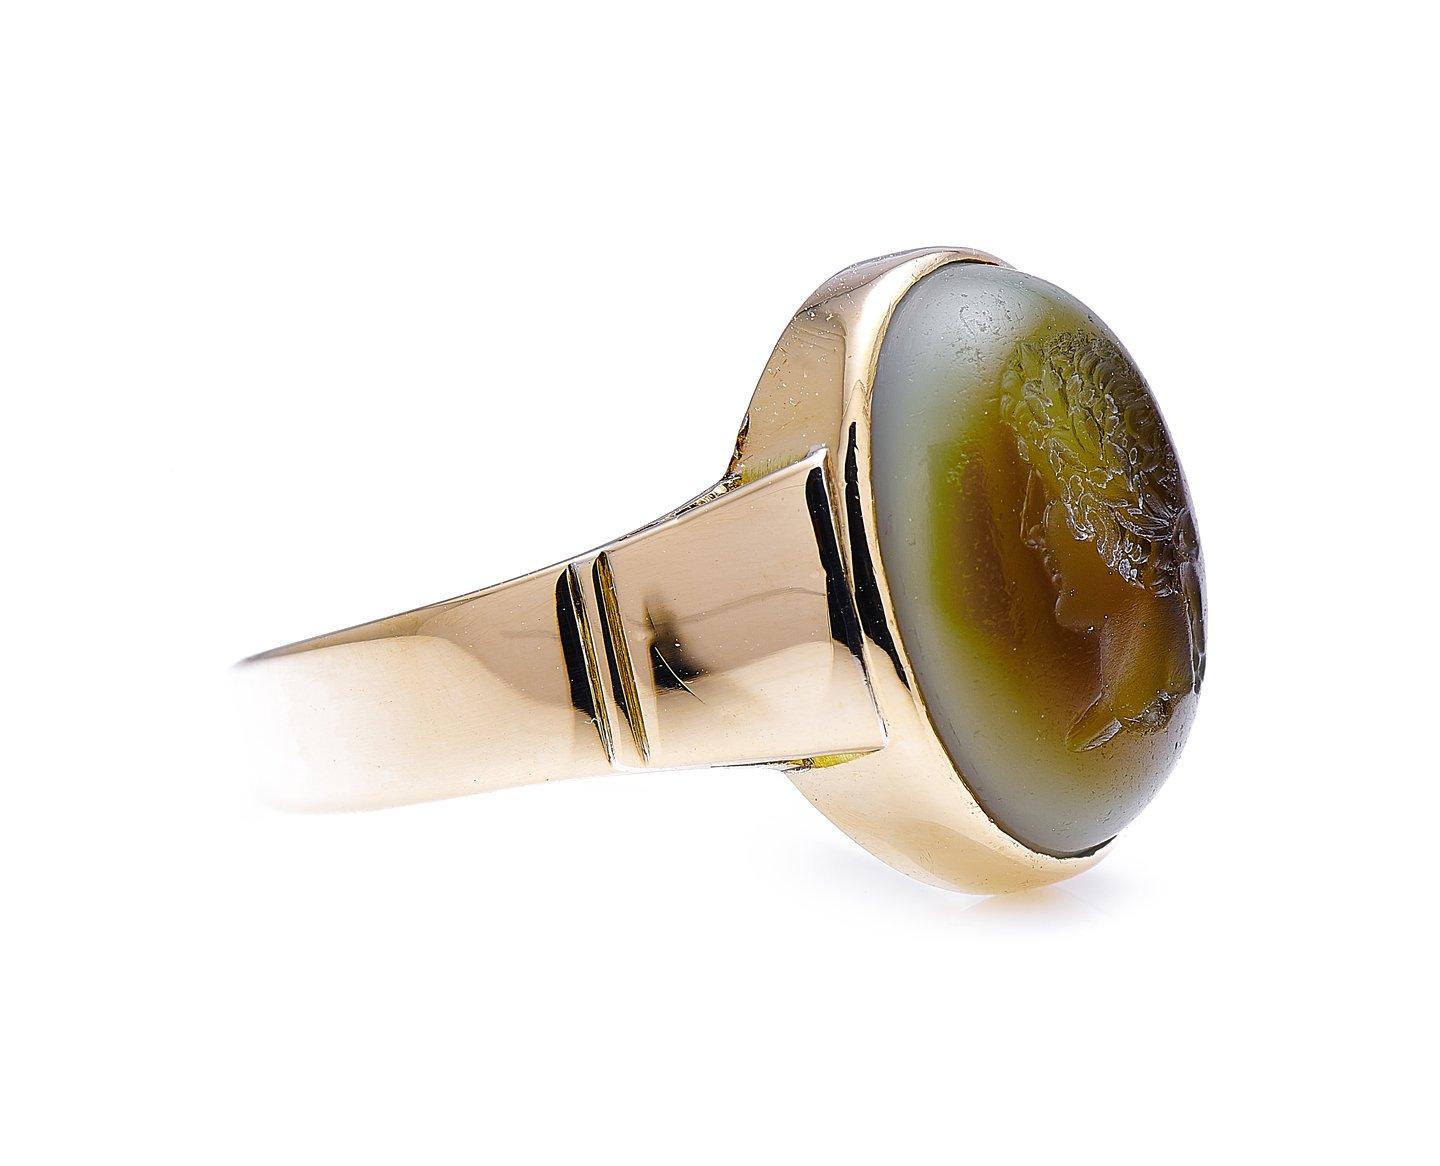 Chalcedony intaglio ring. Intaglios are carved stones, but unlike cameos, where the design protrudes in relief, the design of an intaglio is carved into the stone, in concave relief. This pale green chalcedony with a brownish tinge is intricately